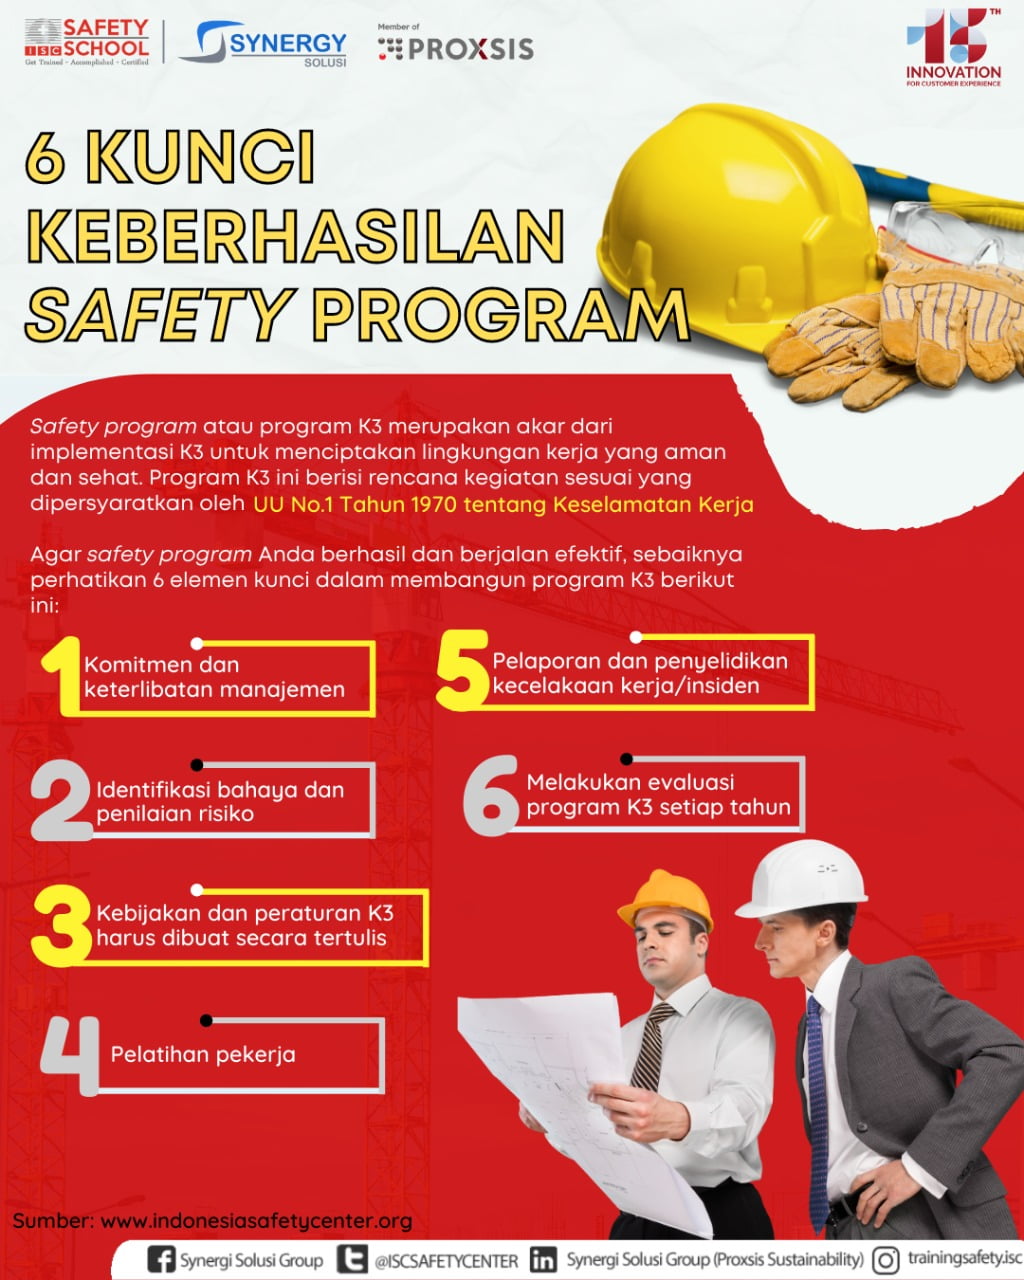 Safety Archives - Page 4 of 5 - Indonesia Safety Center